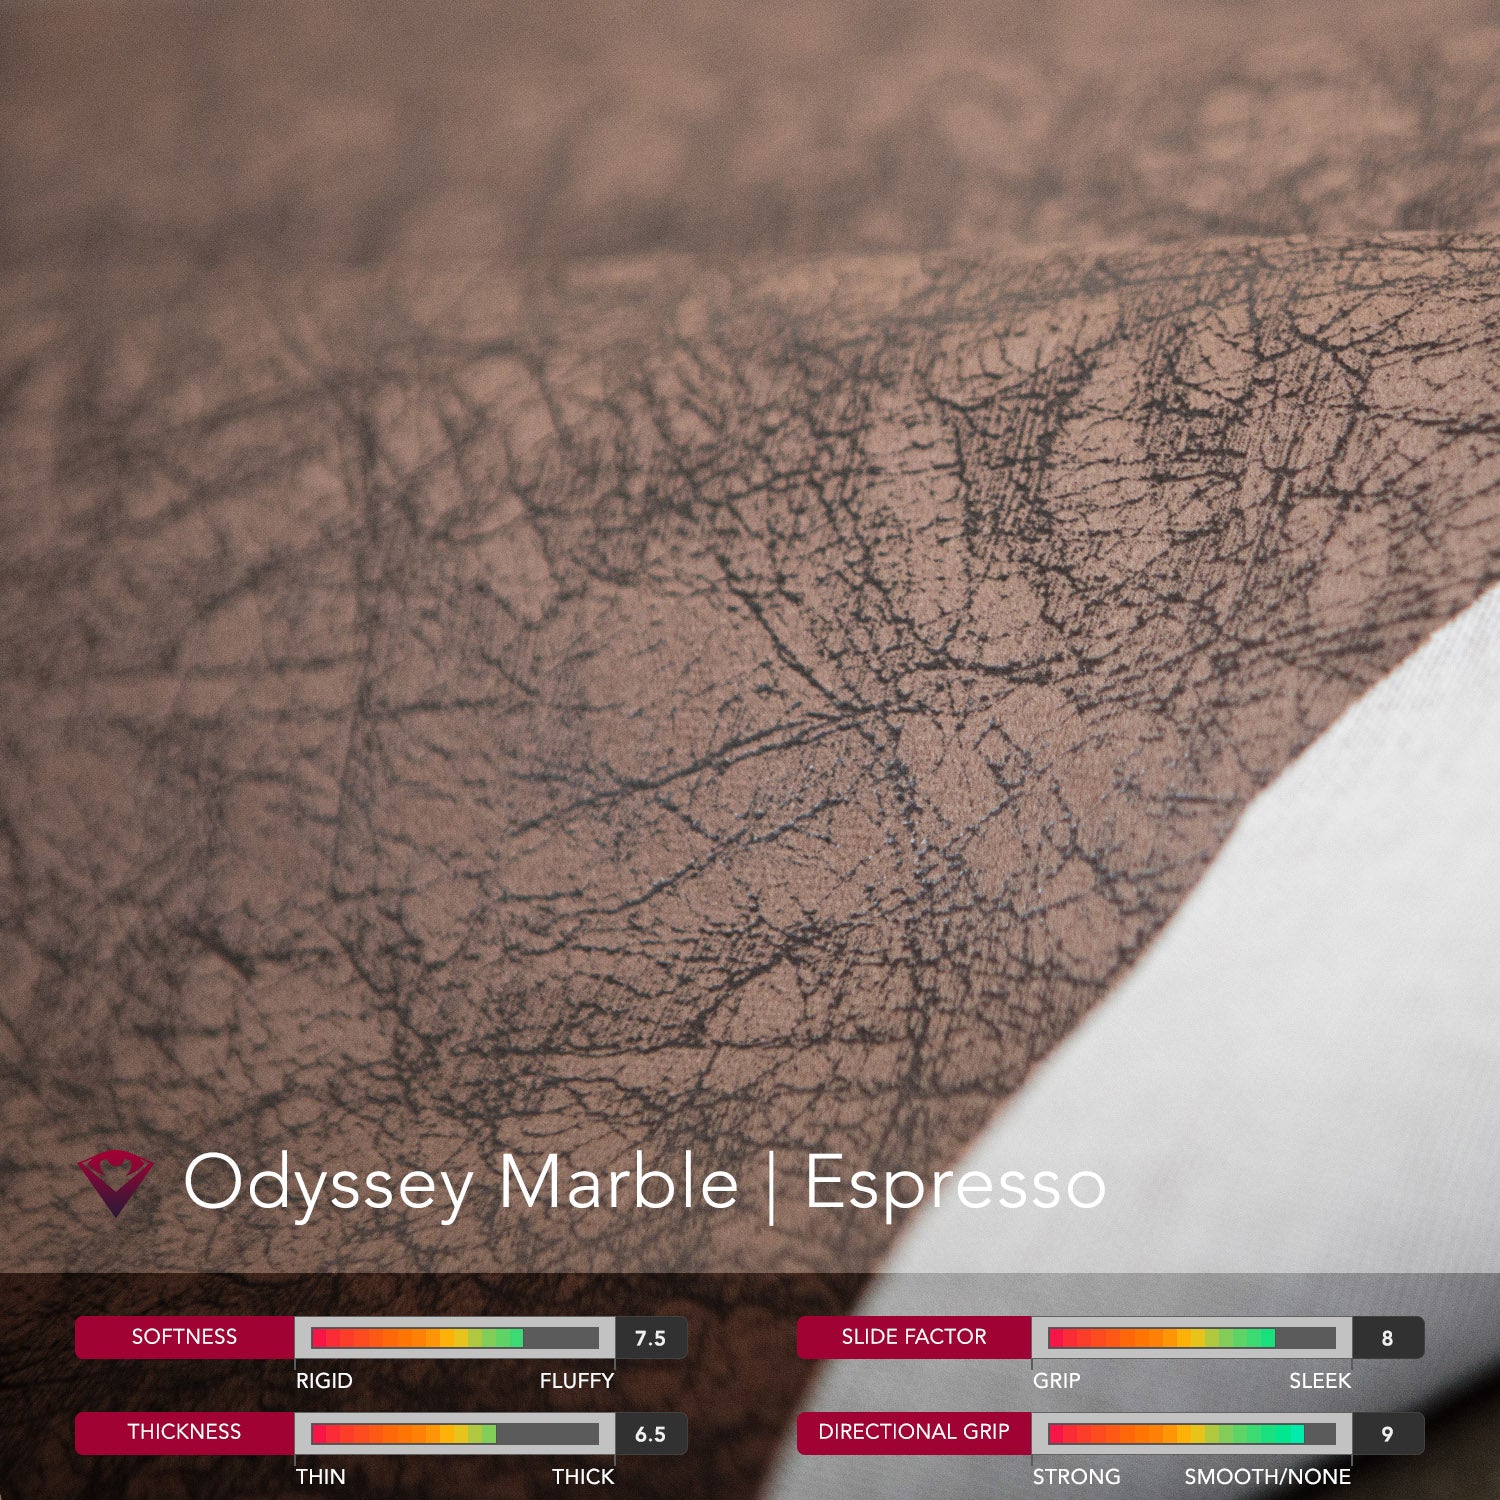 The Wyrmaidens of the Manor | Odyssey Marble Espresso x Torched Maduro